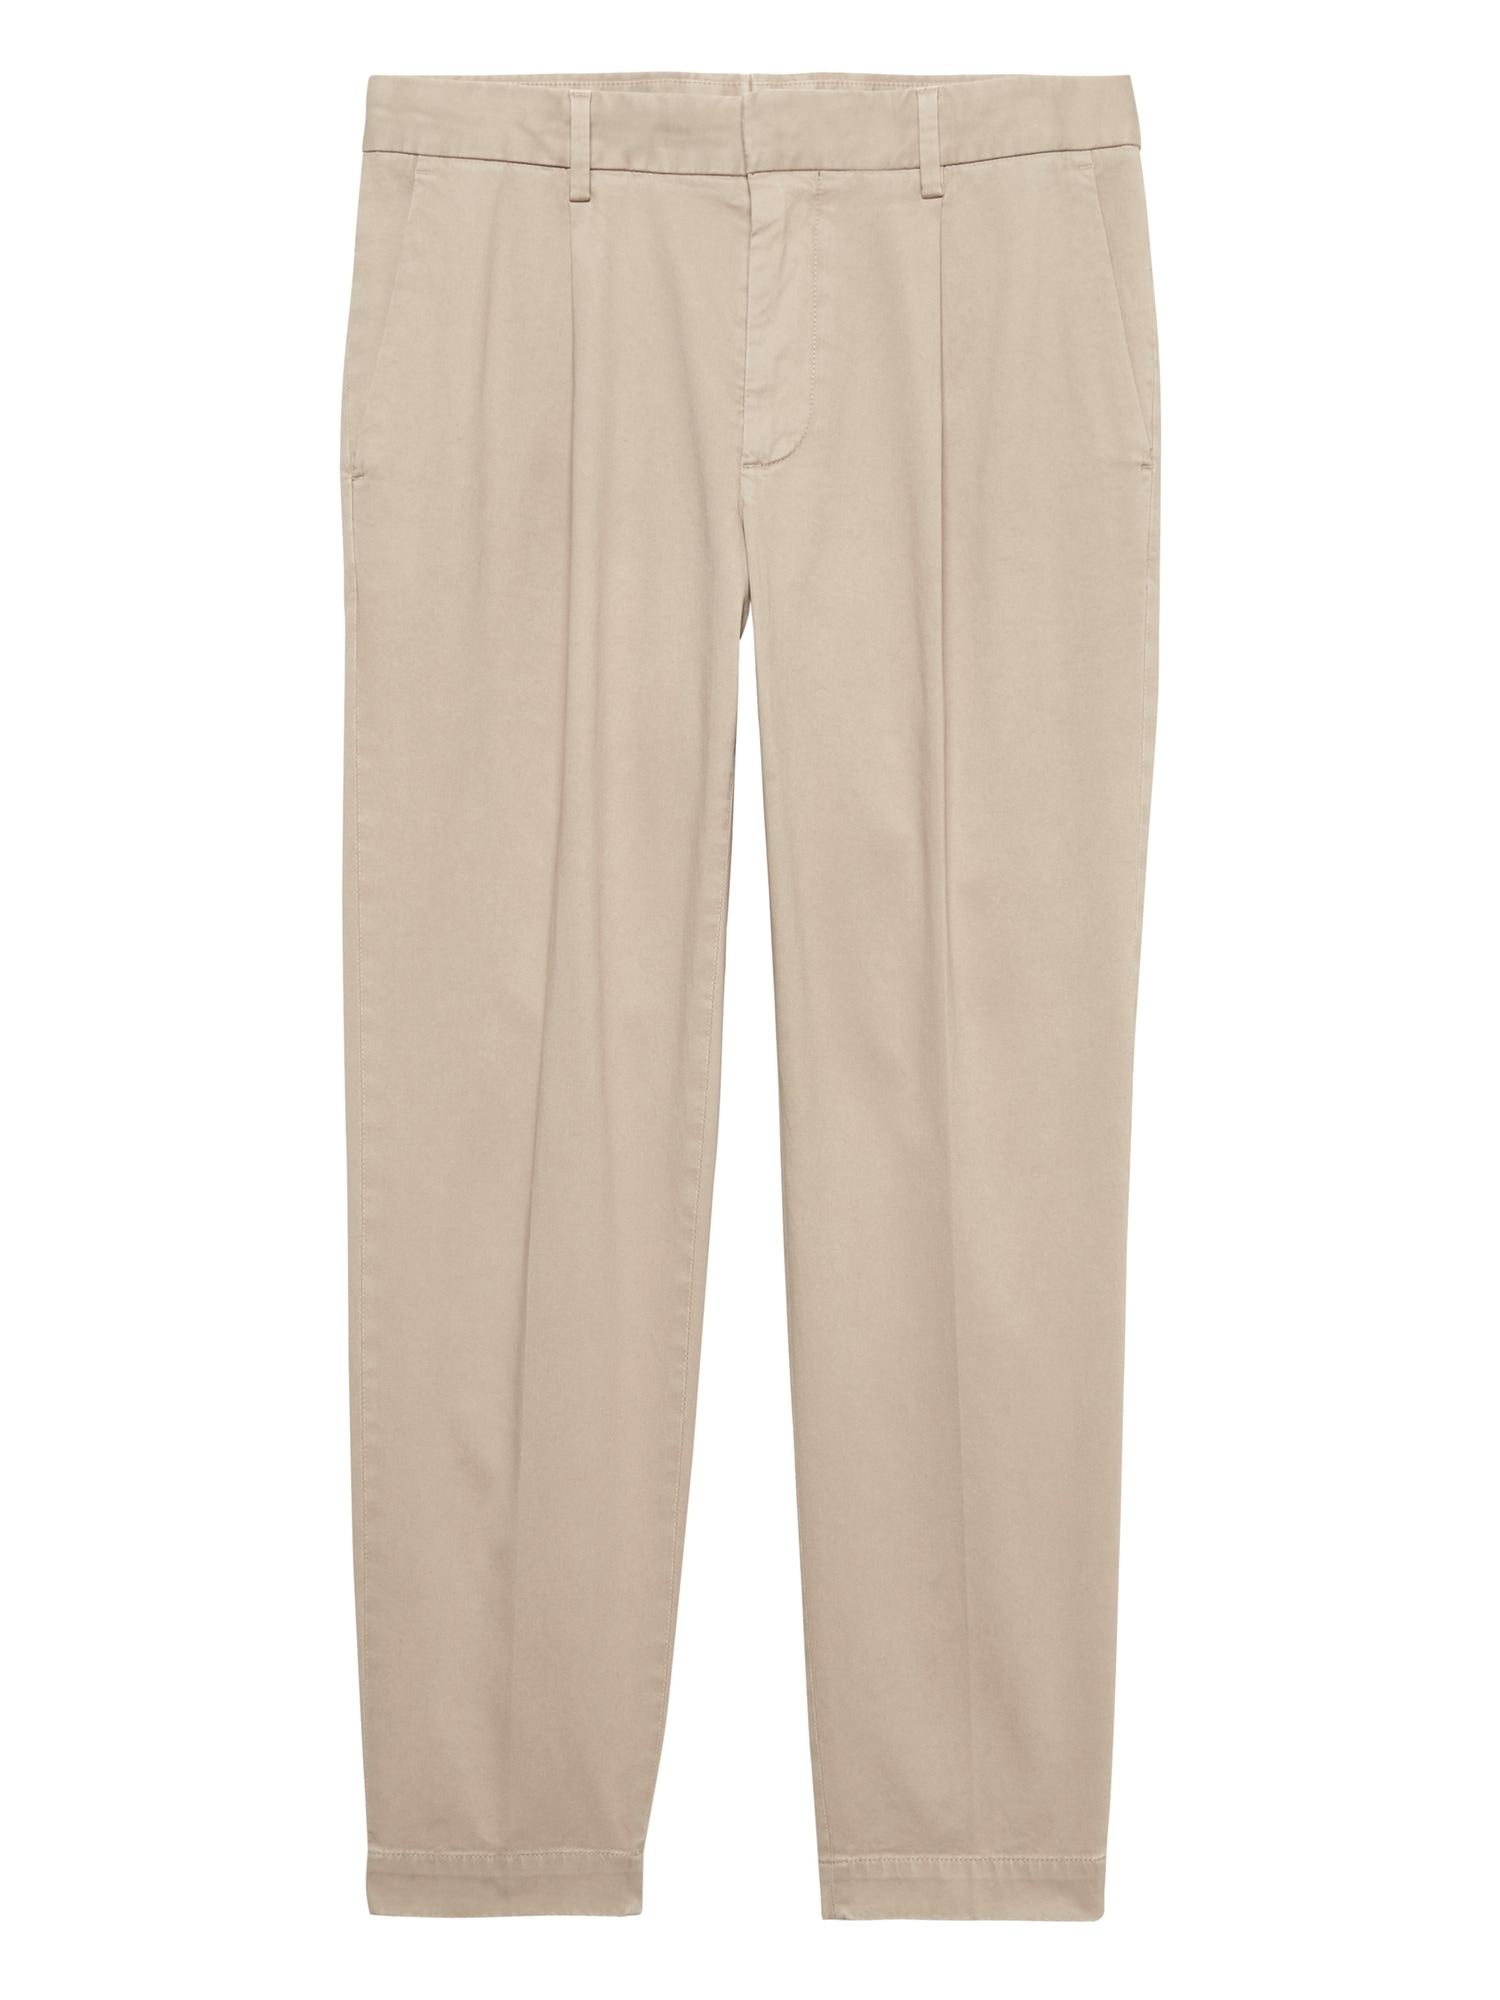 JAPAN EXCLUSIVE Athletic Tapered Traveler Pant